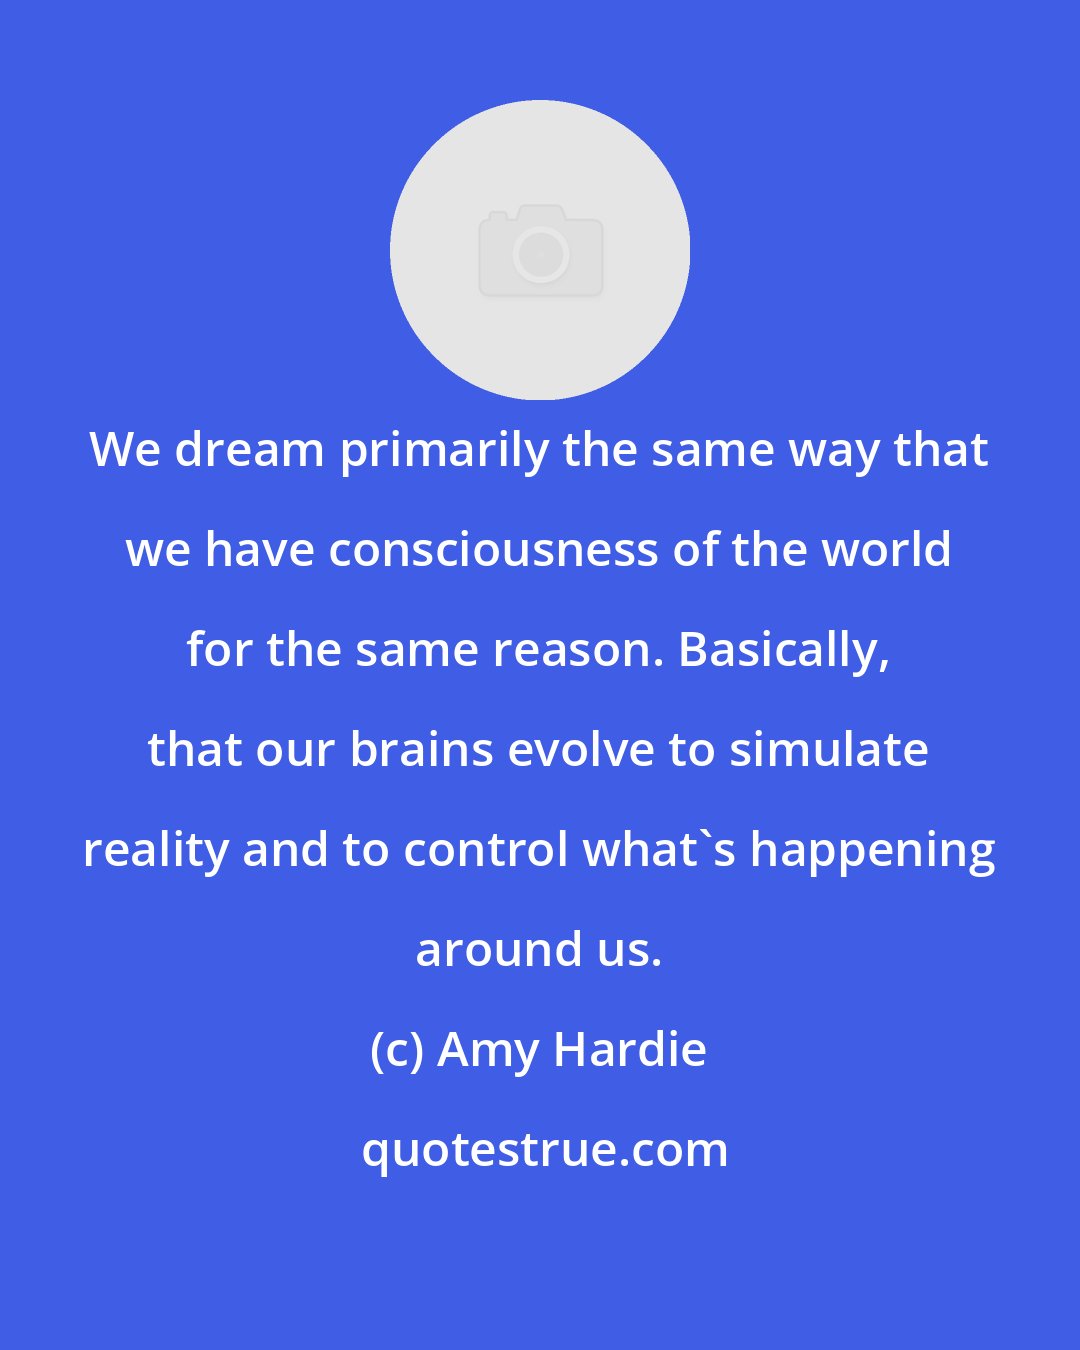 Amy Hardie: We dream primarily the same way that we have consciousness of the world for the same reason. Basically, that our brains evolve to simulate reality and to control what's happening around us.